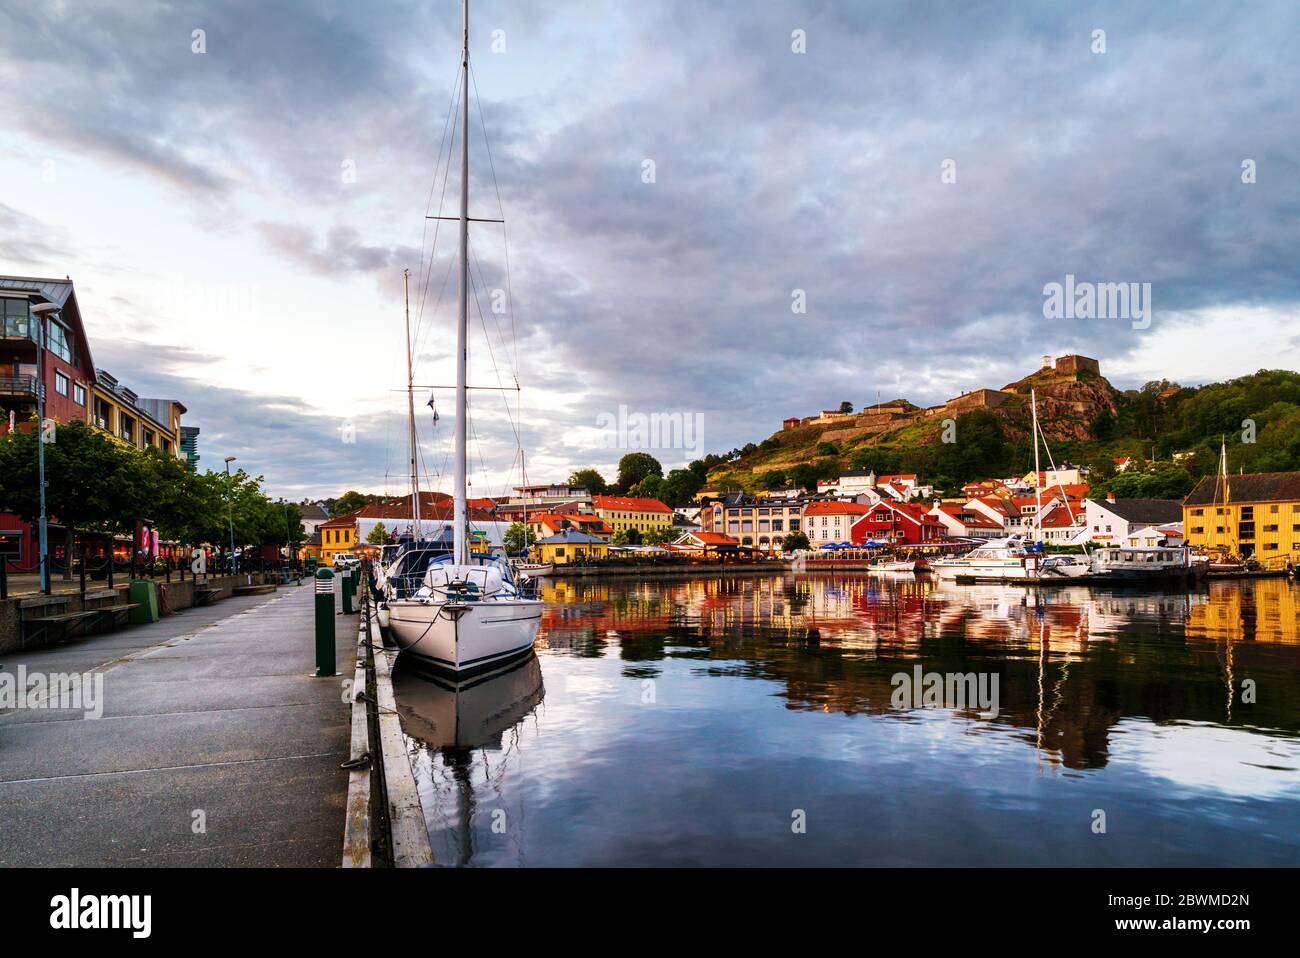 Halden, Norway. View of the illuminated houses and yachts with Fredriksted fortress at the background in Halden, Norway in the evening with cloudy sun Stock Photo